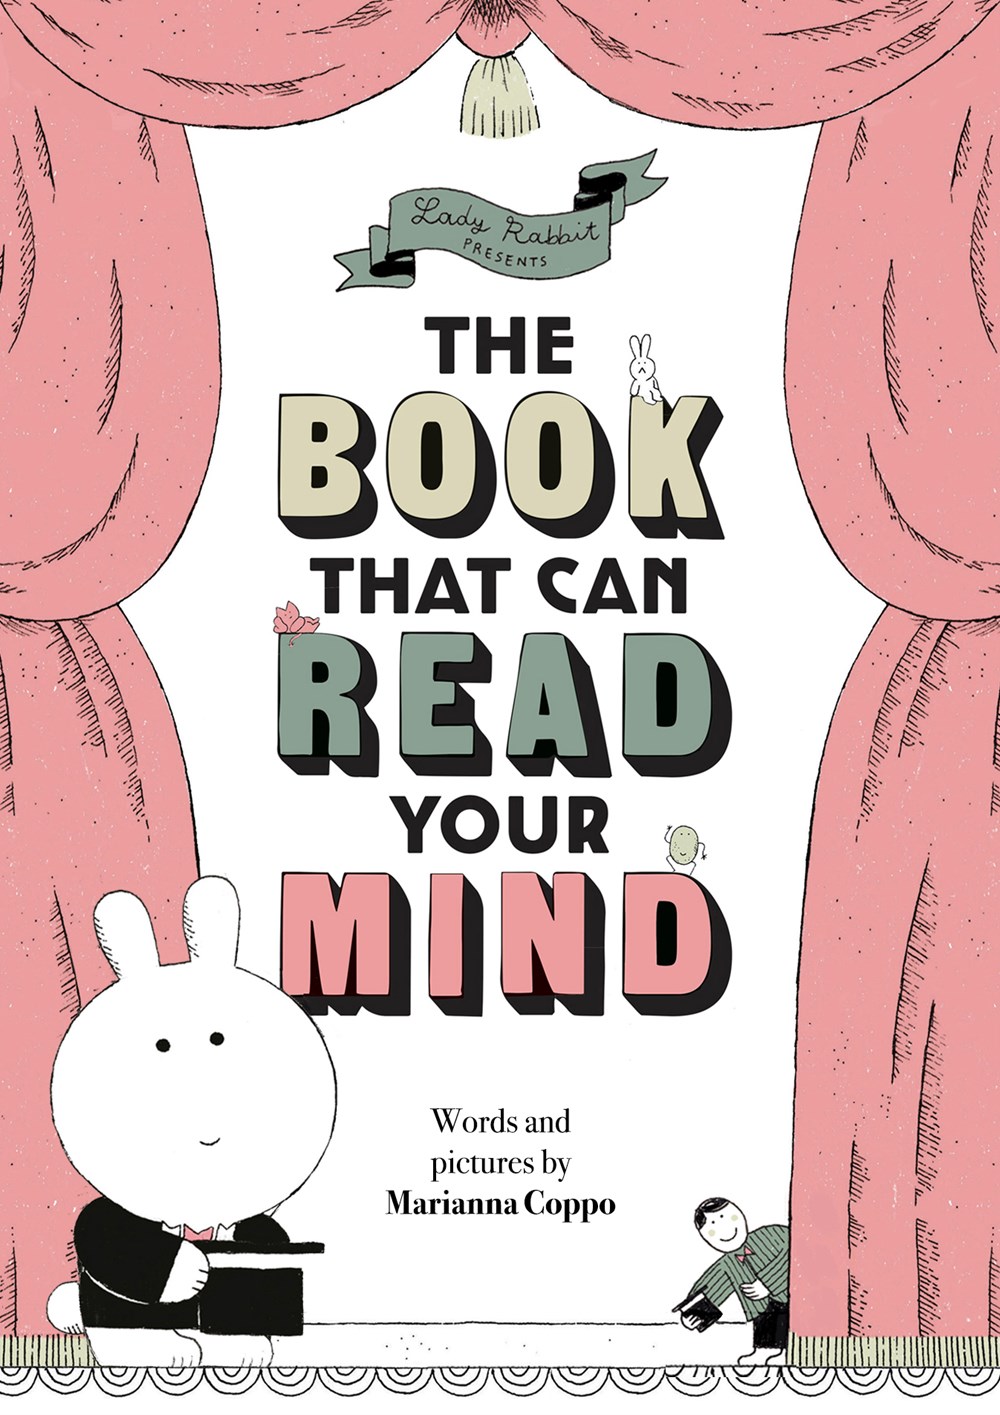 The Book That Can Read Your Mind by Marianna Coppo